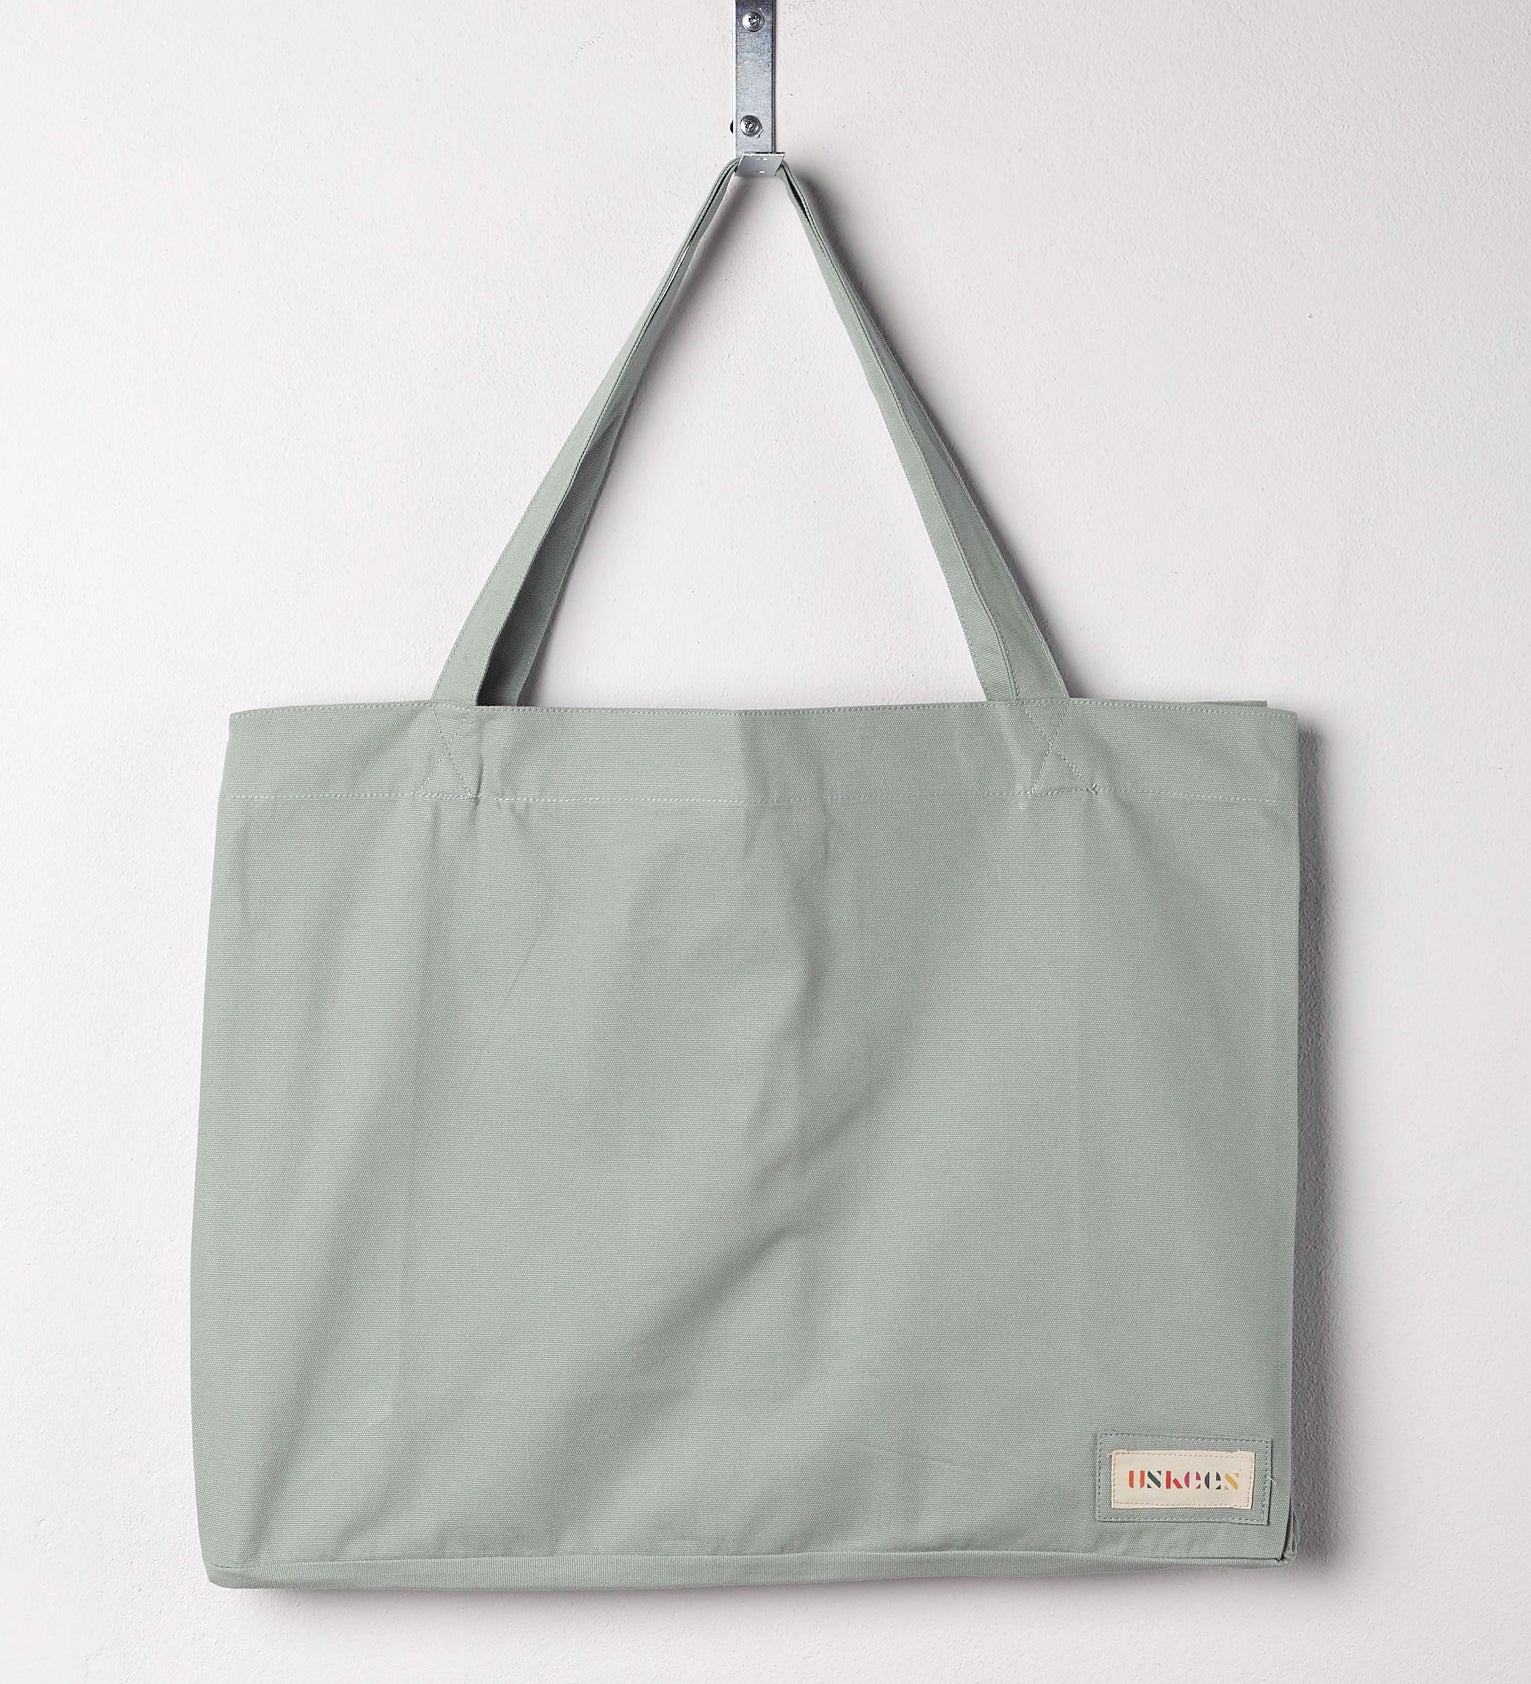 Full front hanging shot of Uskees #4001, large jade tote bag, showing double handles and Uskees woven logo.